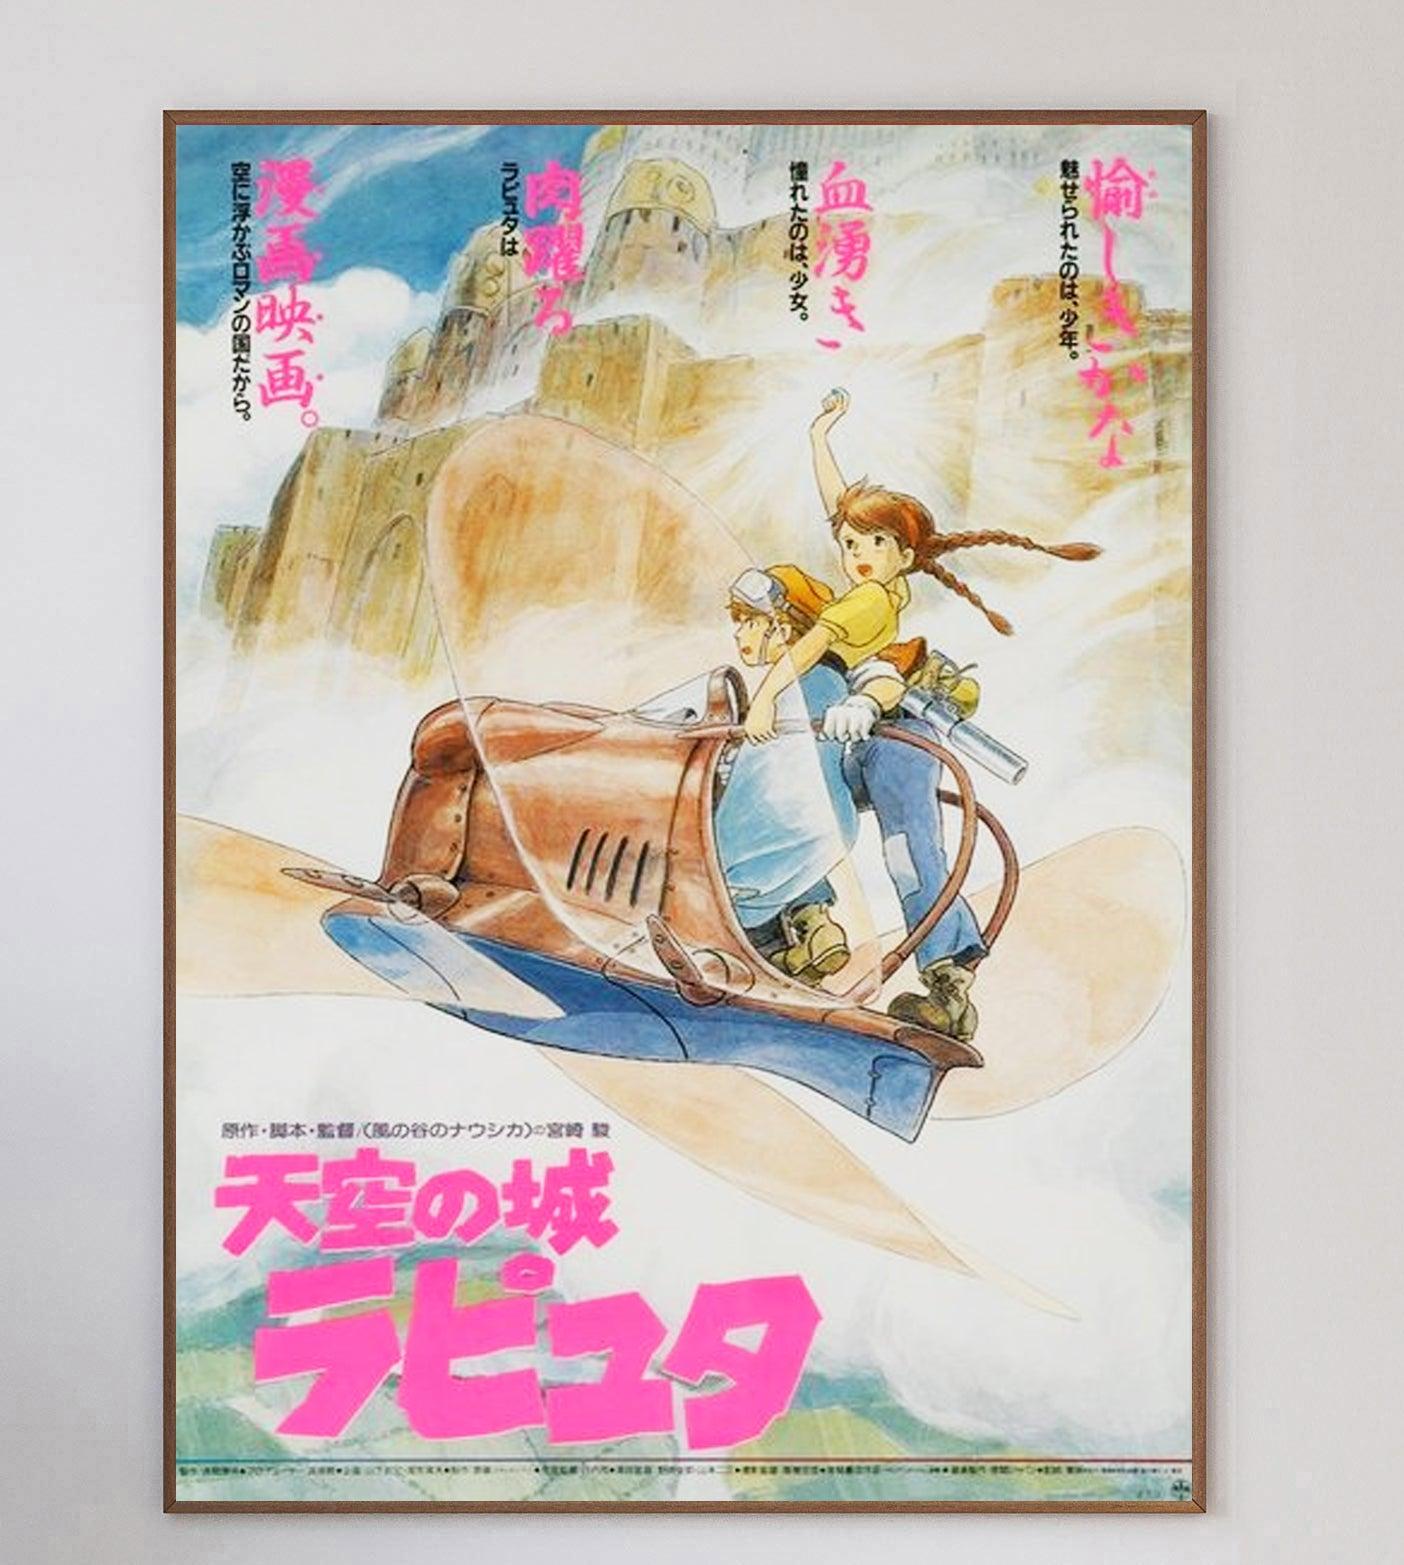 Castle in the Sky, known as Laputa: Castle in the Sky in Europe and Australia, is a 1986 Japanese animated fantasy-adventure film written and directed by Hayao Miyazaki. It was the first film animated by Studio Ghibli and was animated for Tokuma